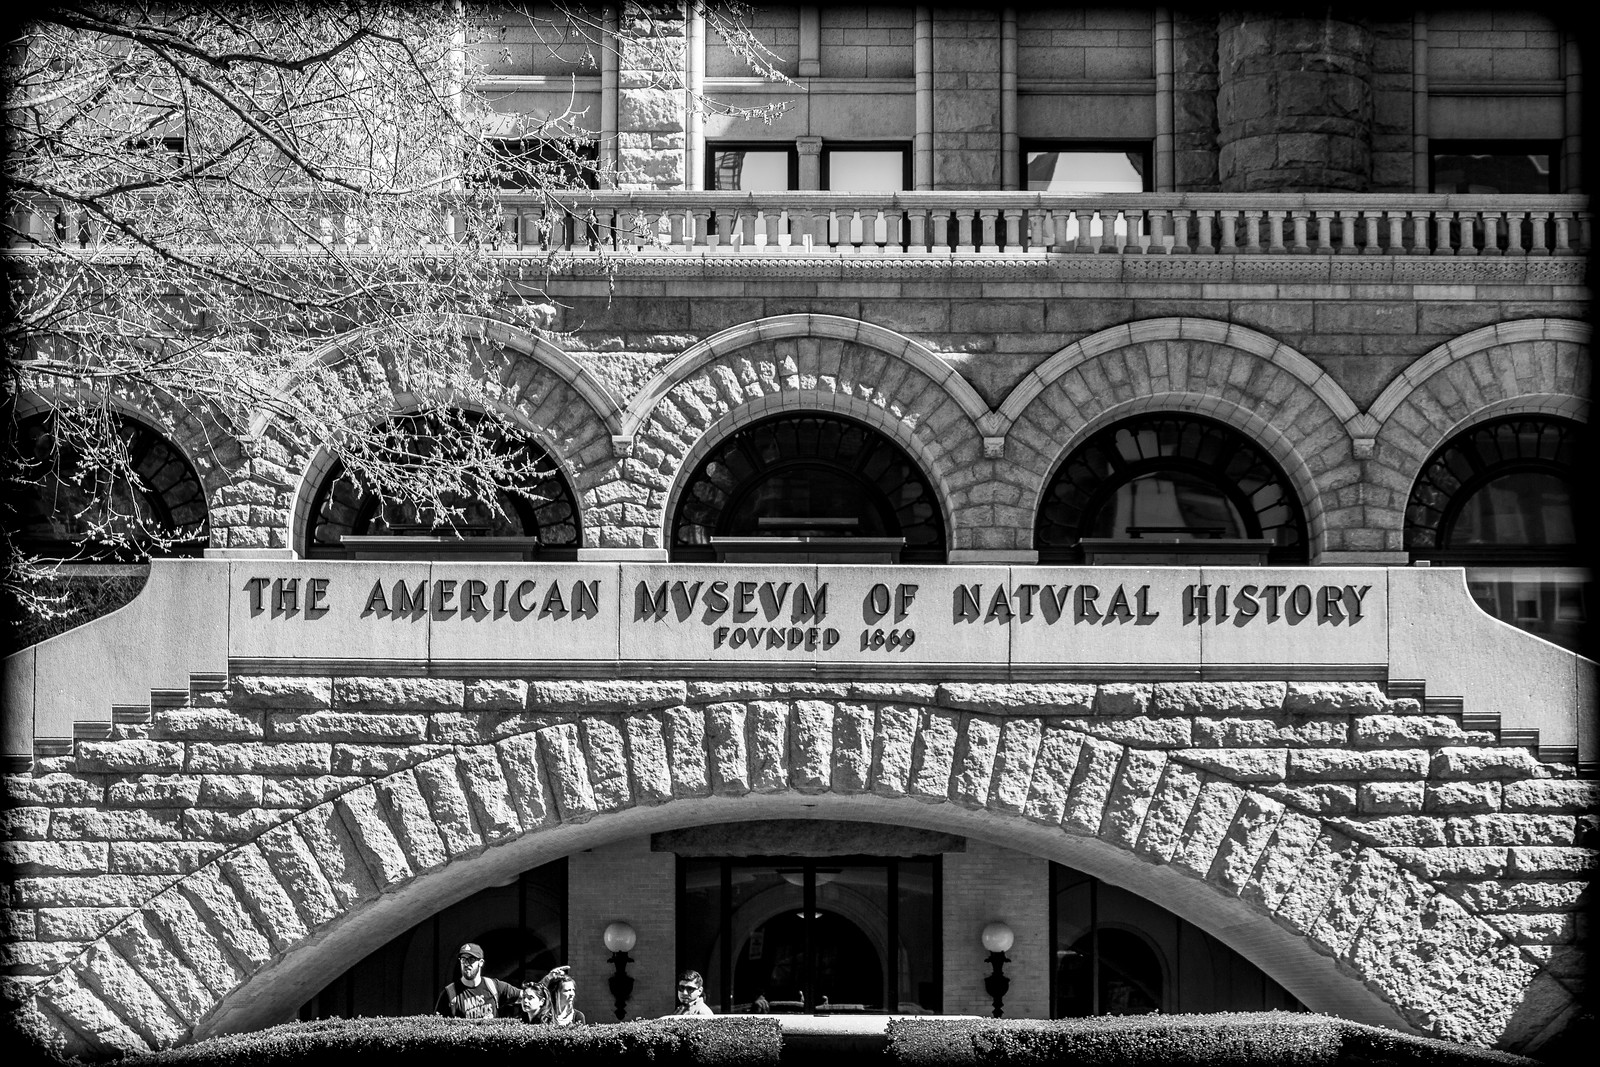 The Americe Museum of Natural History